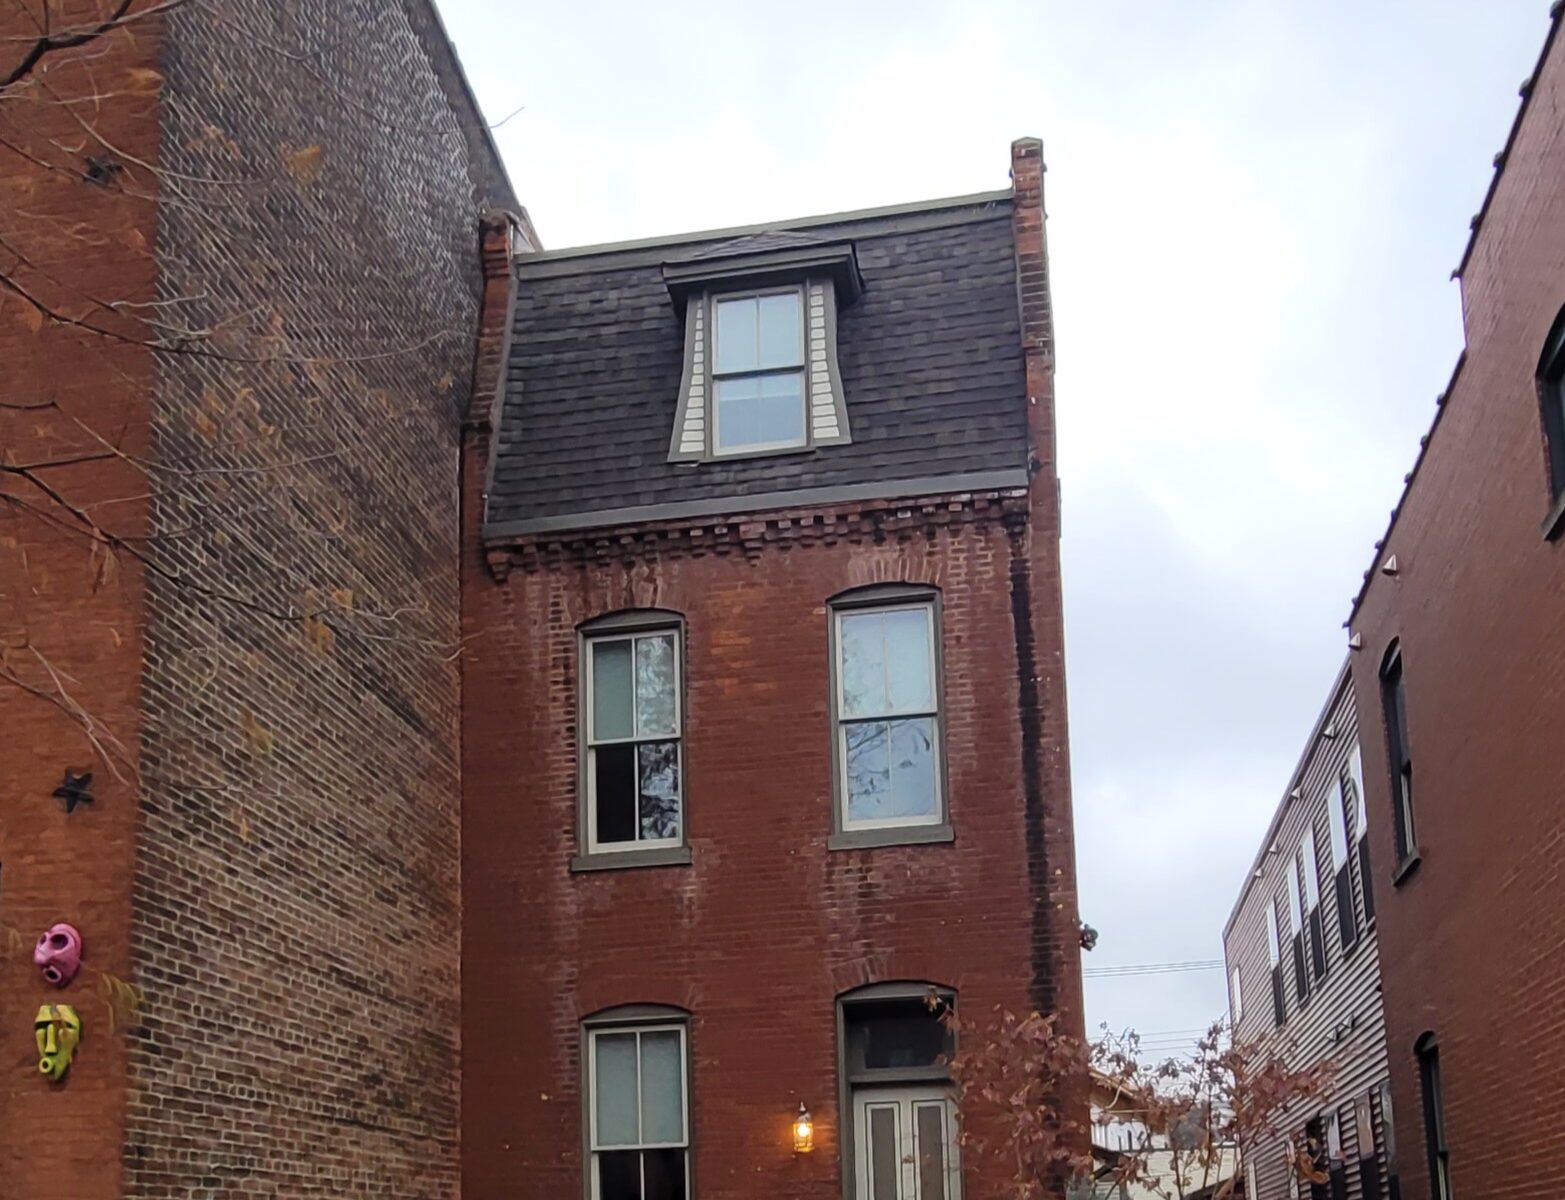 A small brick two story home